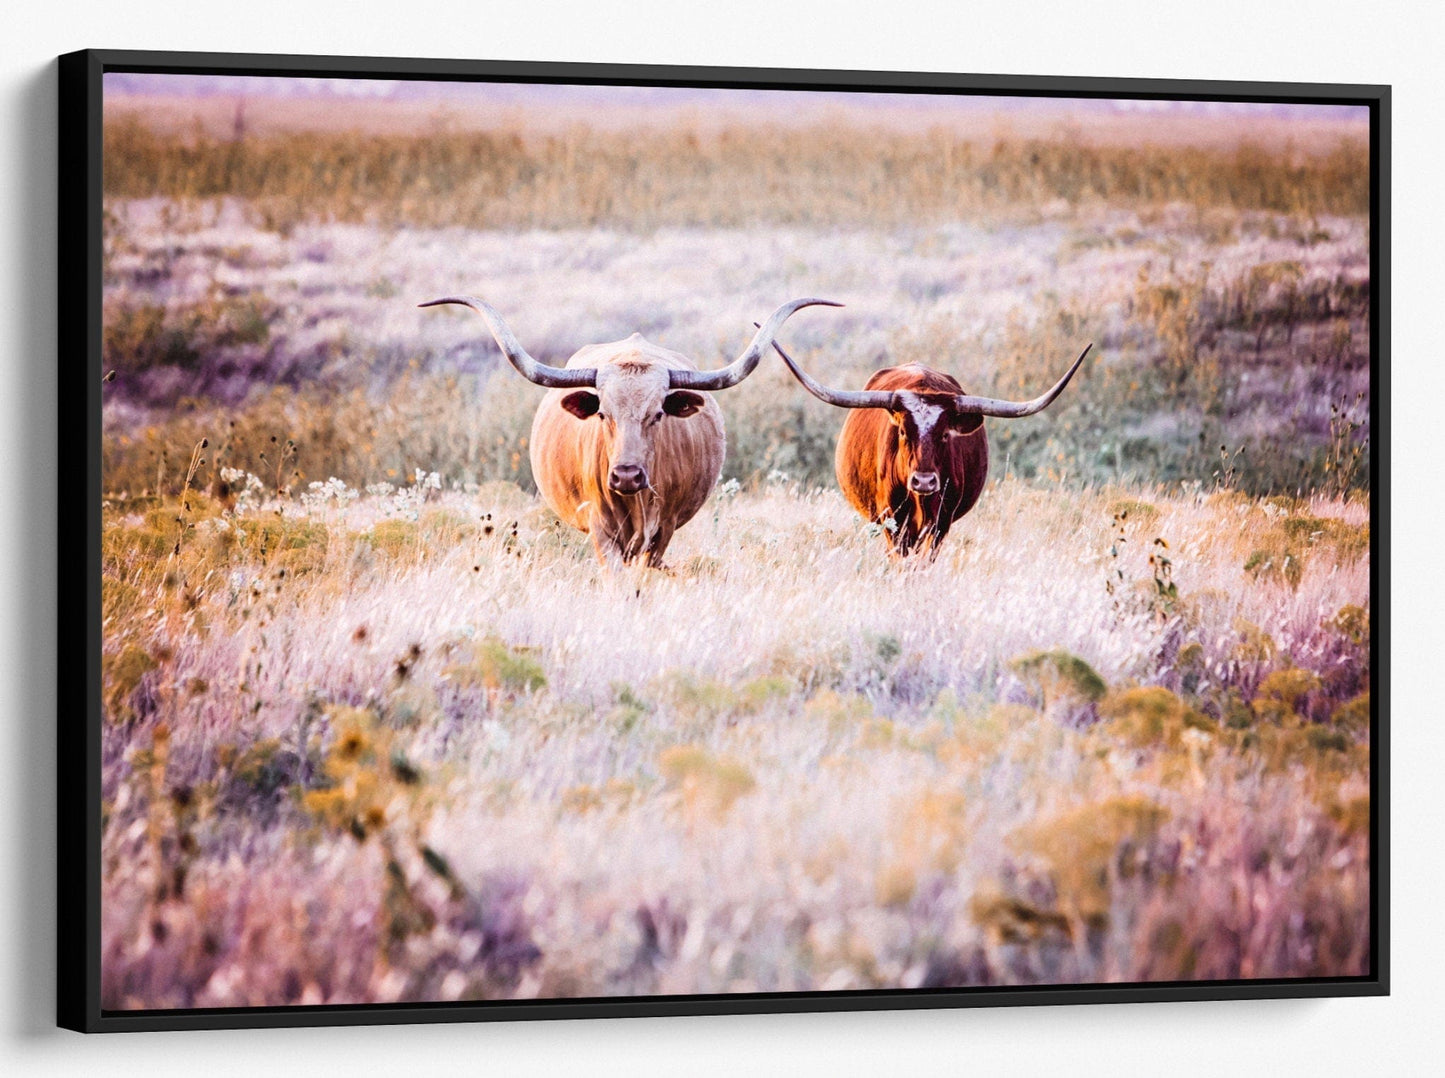 Texas Longhorn Cows in Colorful Pasture Grass Canvas-Black Frame / 12 x 18 Inches Wall Art Teri James Photography